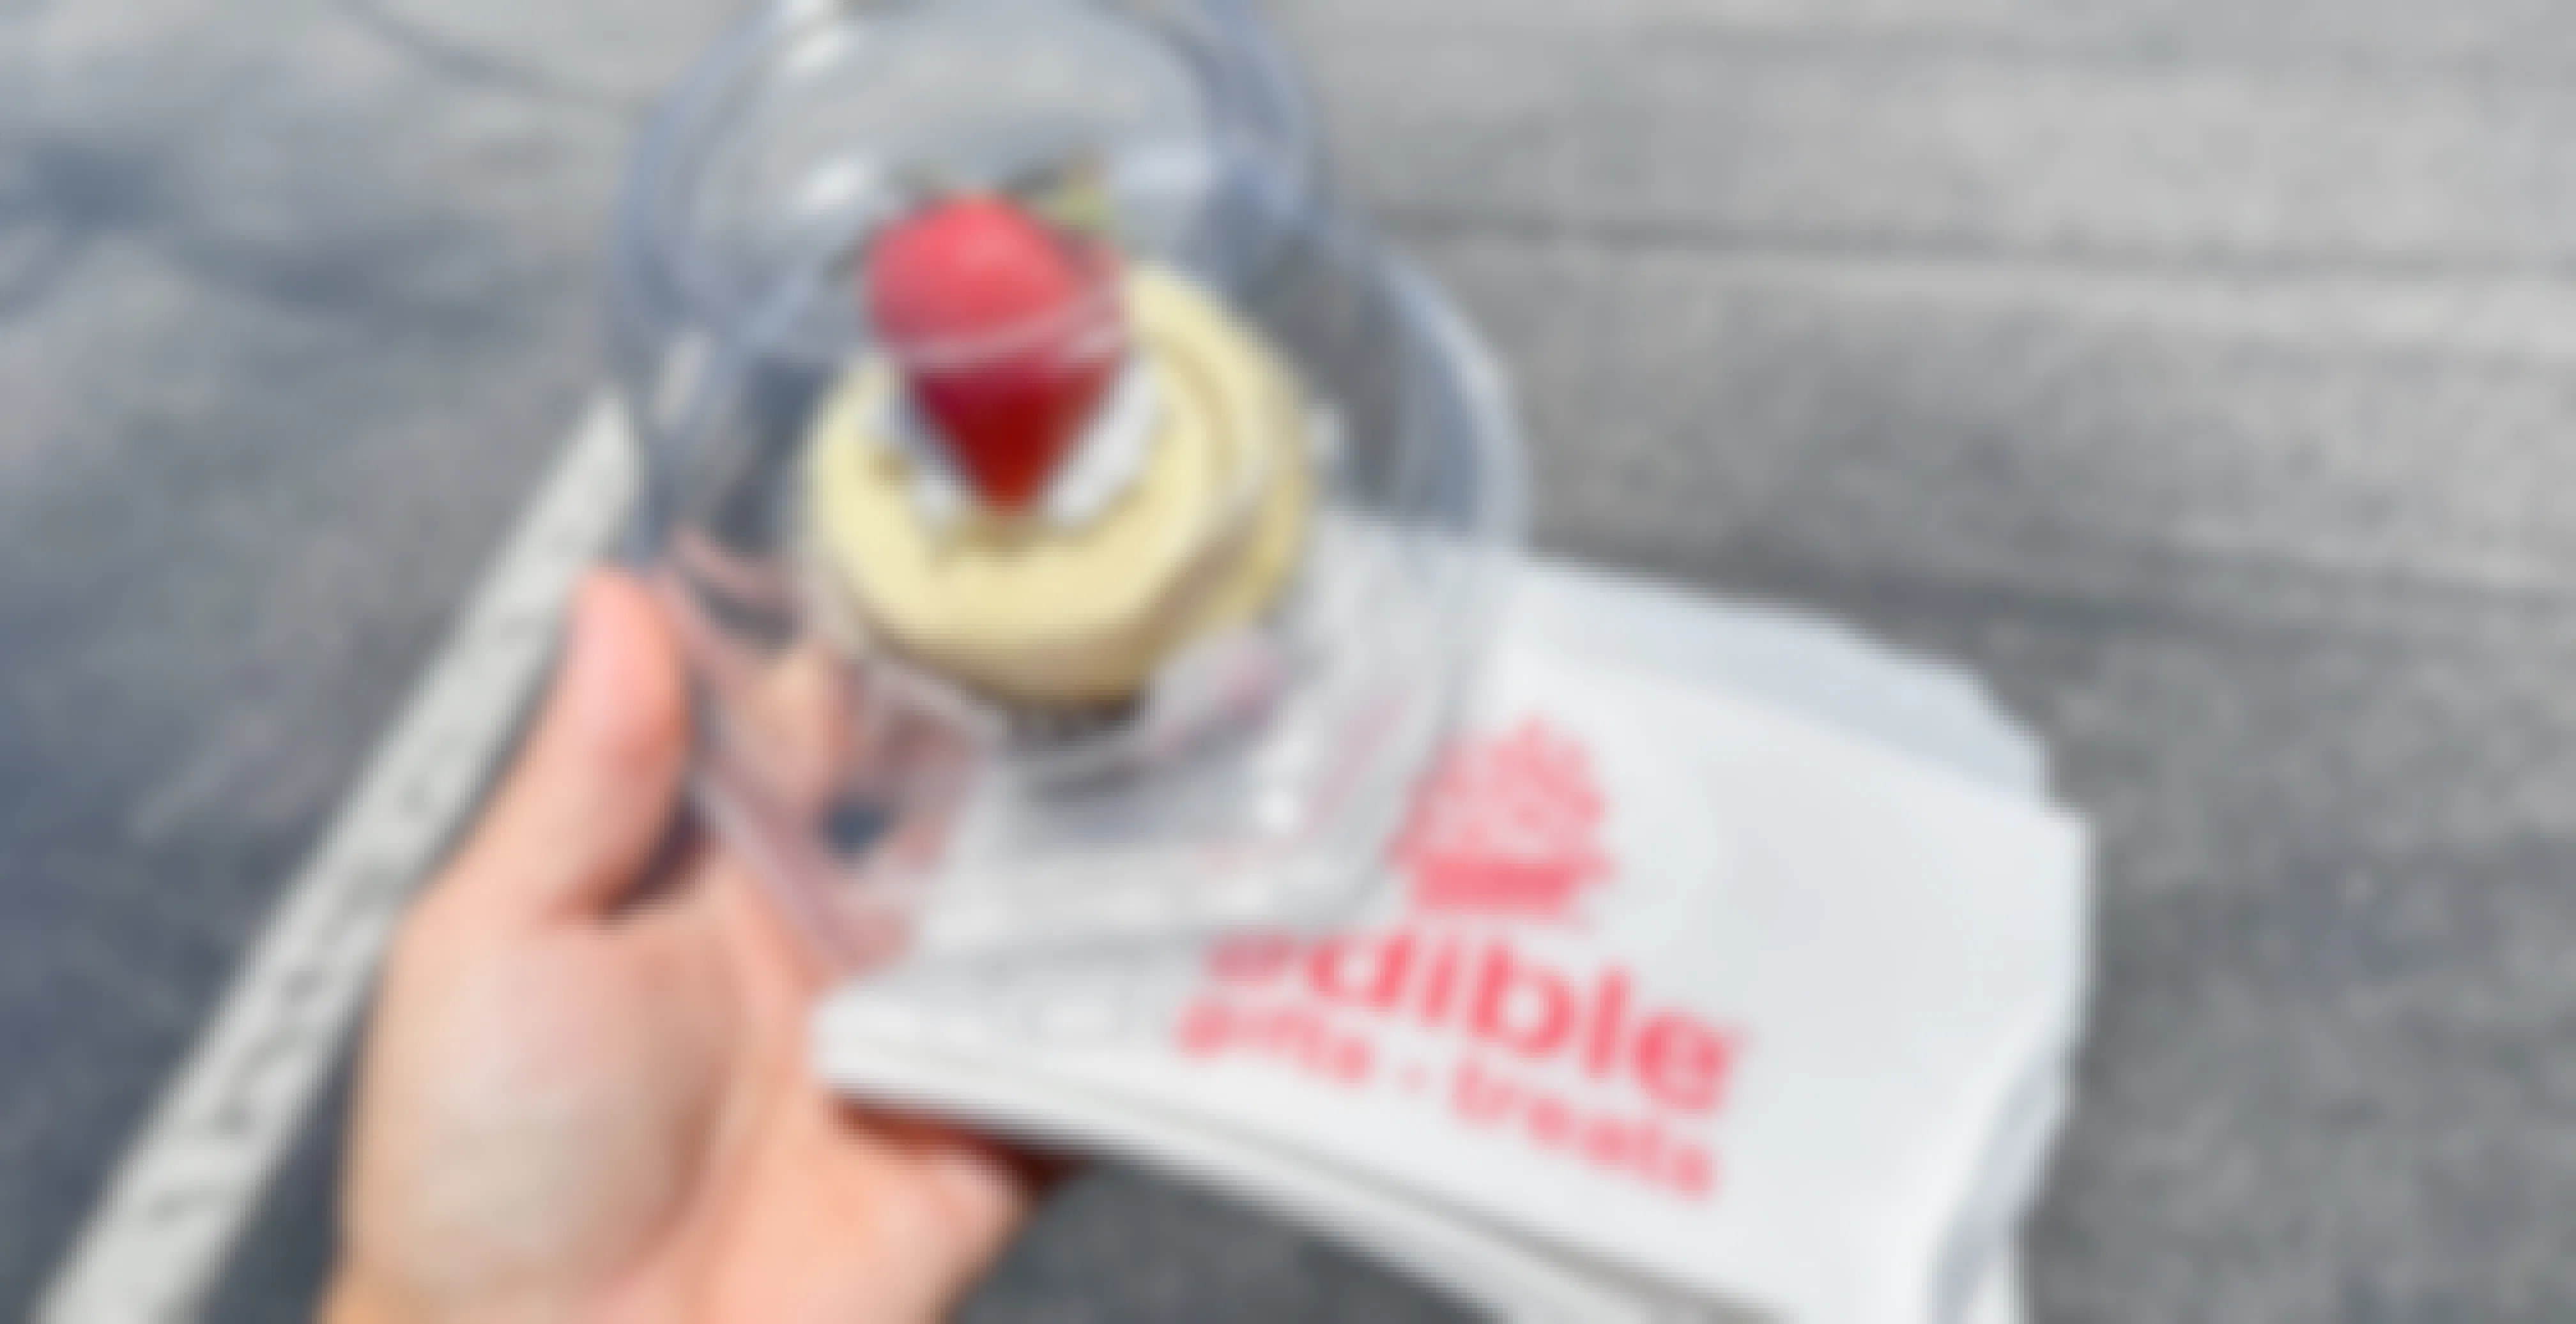 How to Save at Edible Arrangements (And Get Your Birthday Freebie!)